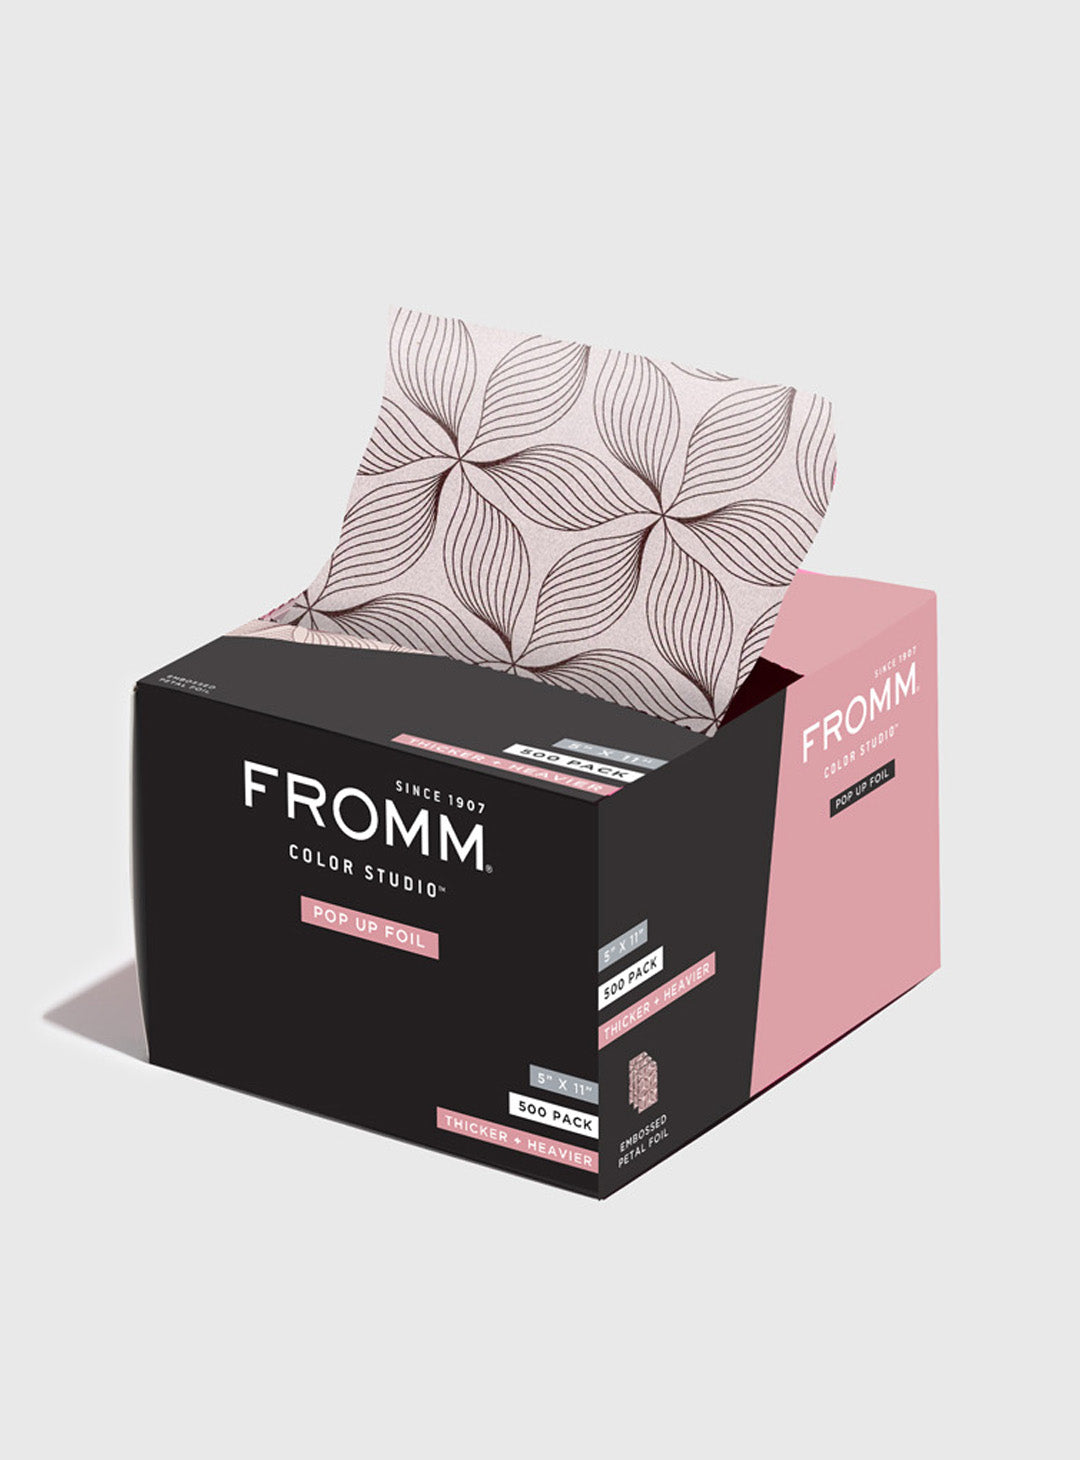 Fromm Color Studio Pop Up Hair Foil in Palms Leaves Pattern 5 x 11 Embossed  Aluminum Foil Sheets Hair Foils For Highlighting and Coloring - 500 Foil  Sheets